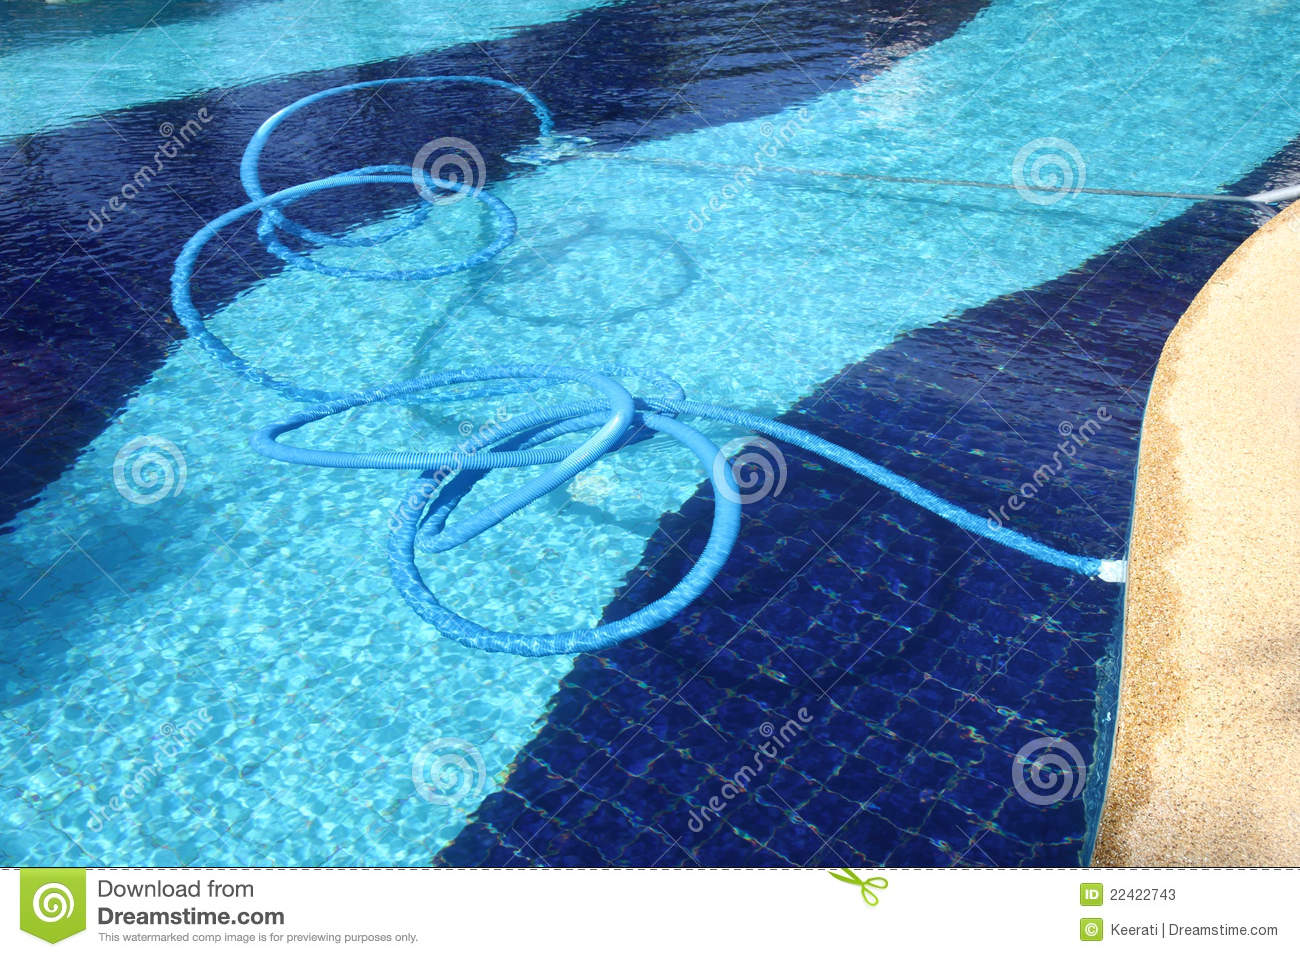 Pool Cleaning Stock Photos   Image  22422743